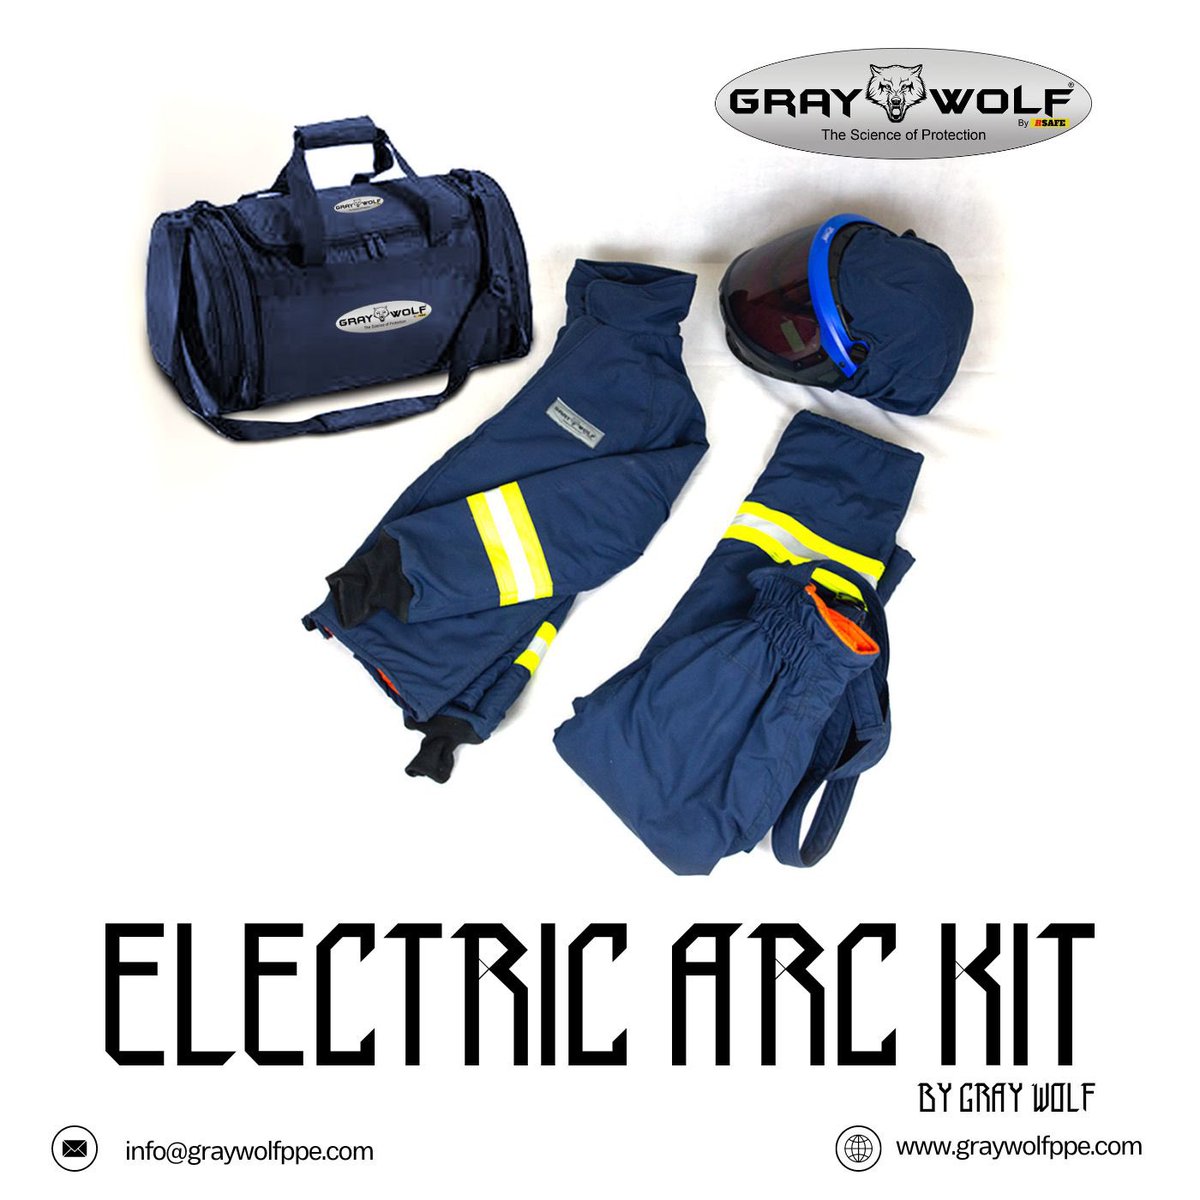 GRAYWOLF®️ Electric Arc Suits and Kit
Your Ultimate Protection Against Arc Hazards
40Cal arc suit, 75Cal arc suit and 100cal arc suit

#graywolfppe #arcflash #arcsuits #arcflashsuits #arcsuits #arcgloves #safetygear #electricalprotection #workplacehazards #confidentprofessionals